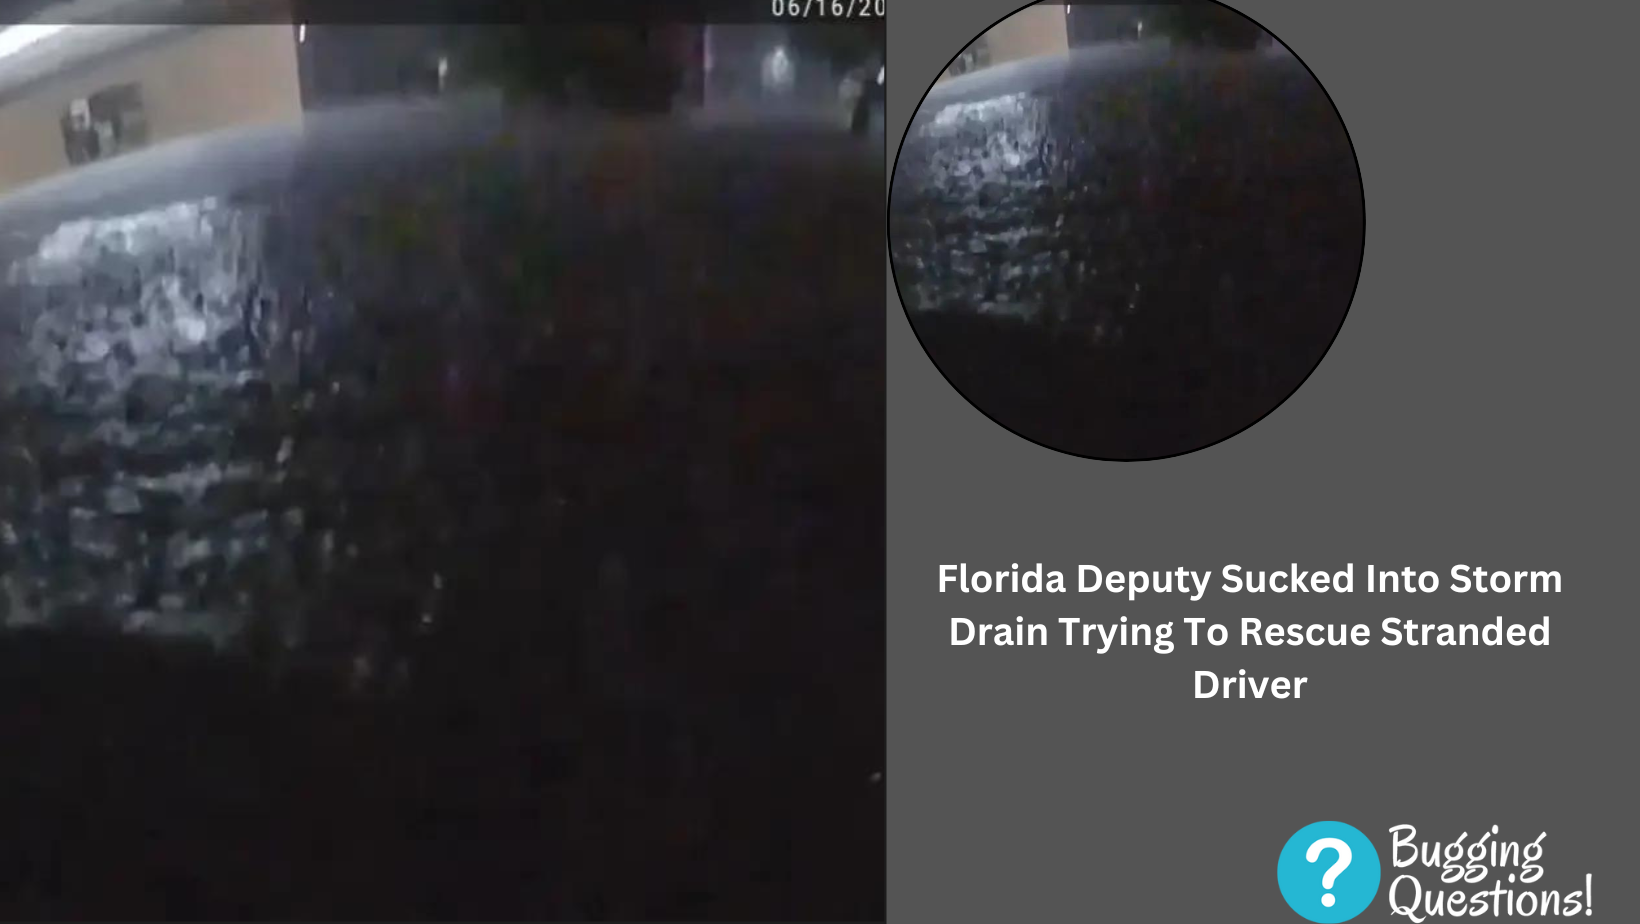 Florida Deputy Sucked Into Storm Drain Trying To Rescue Stranded Driver